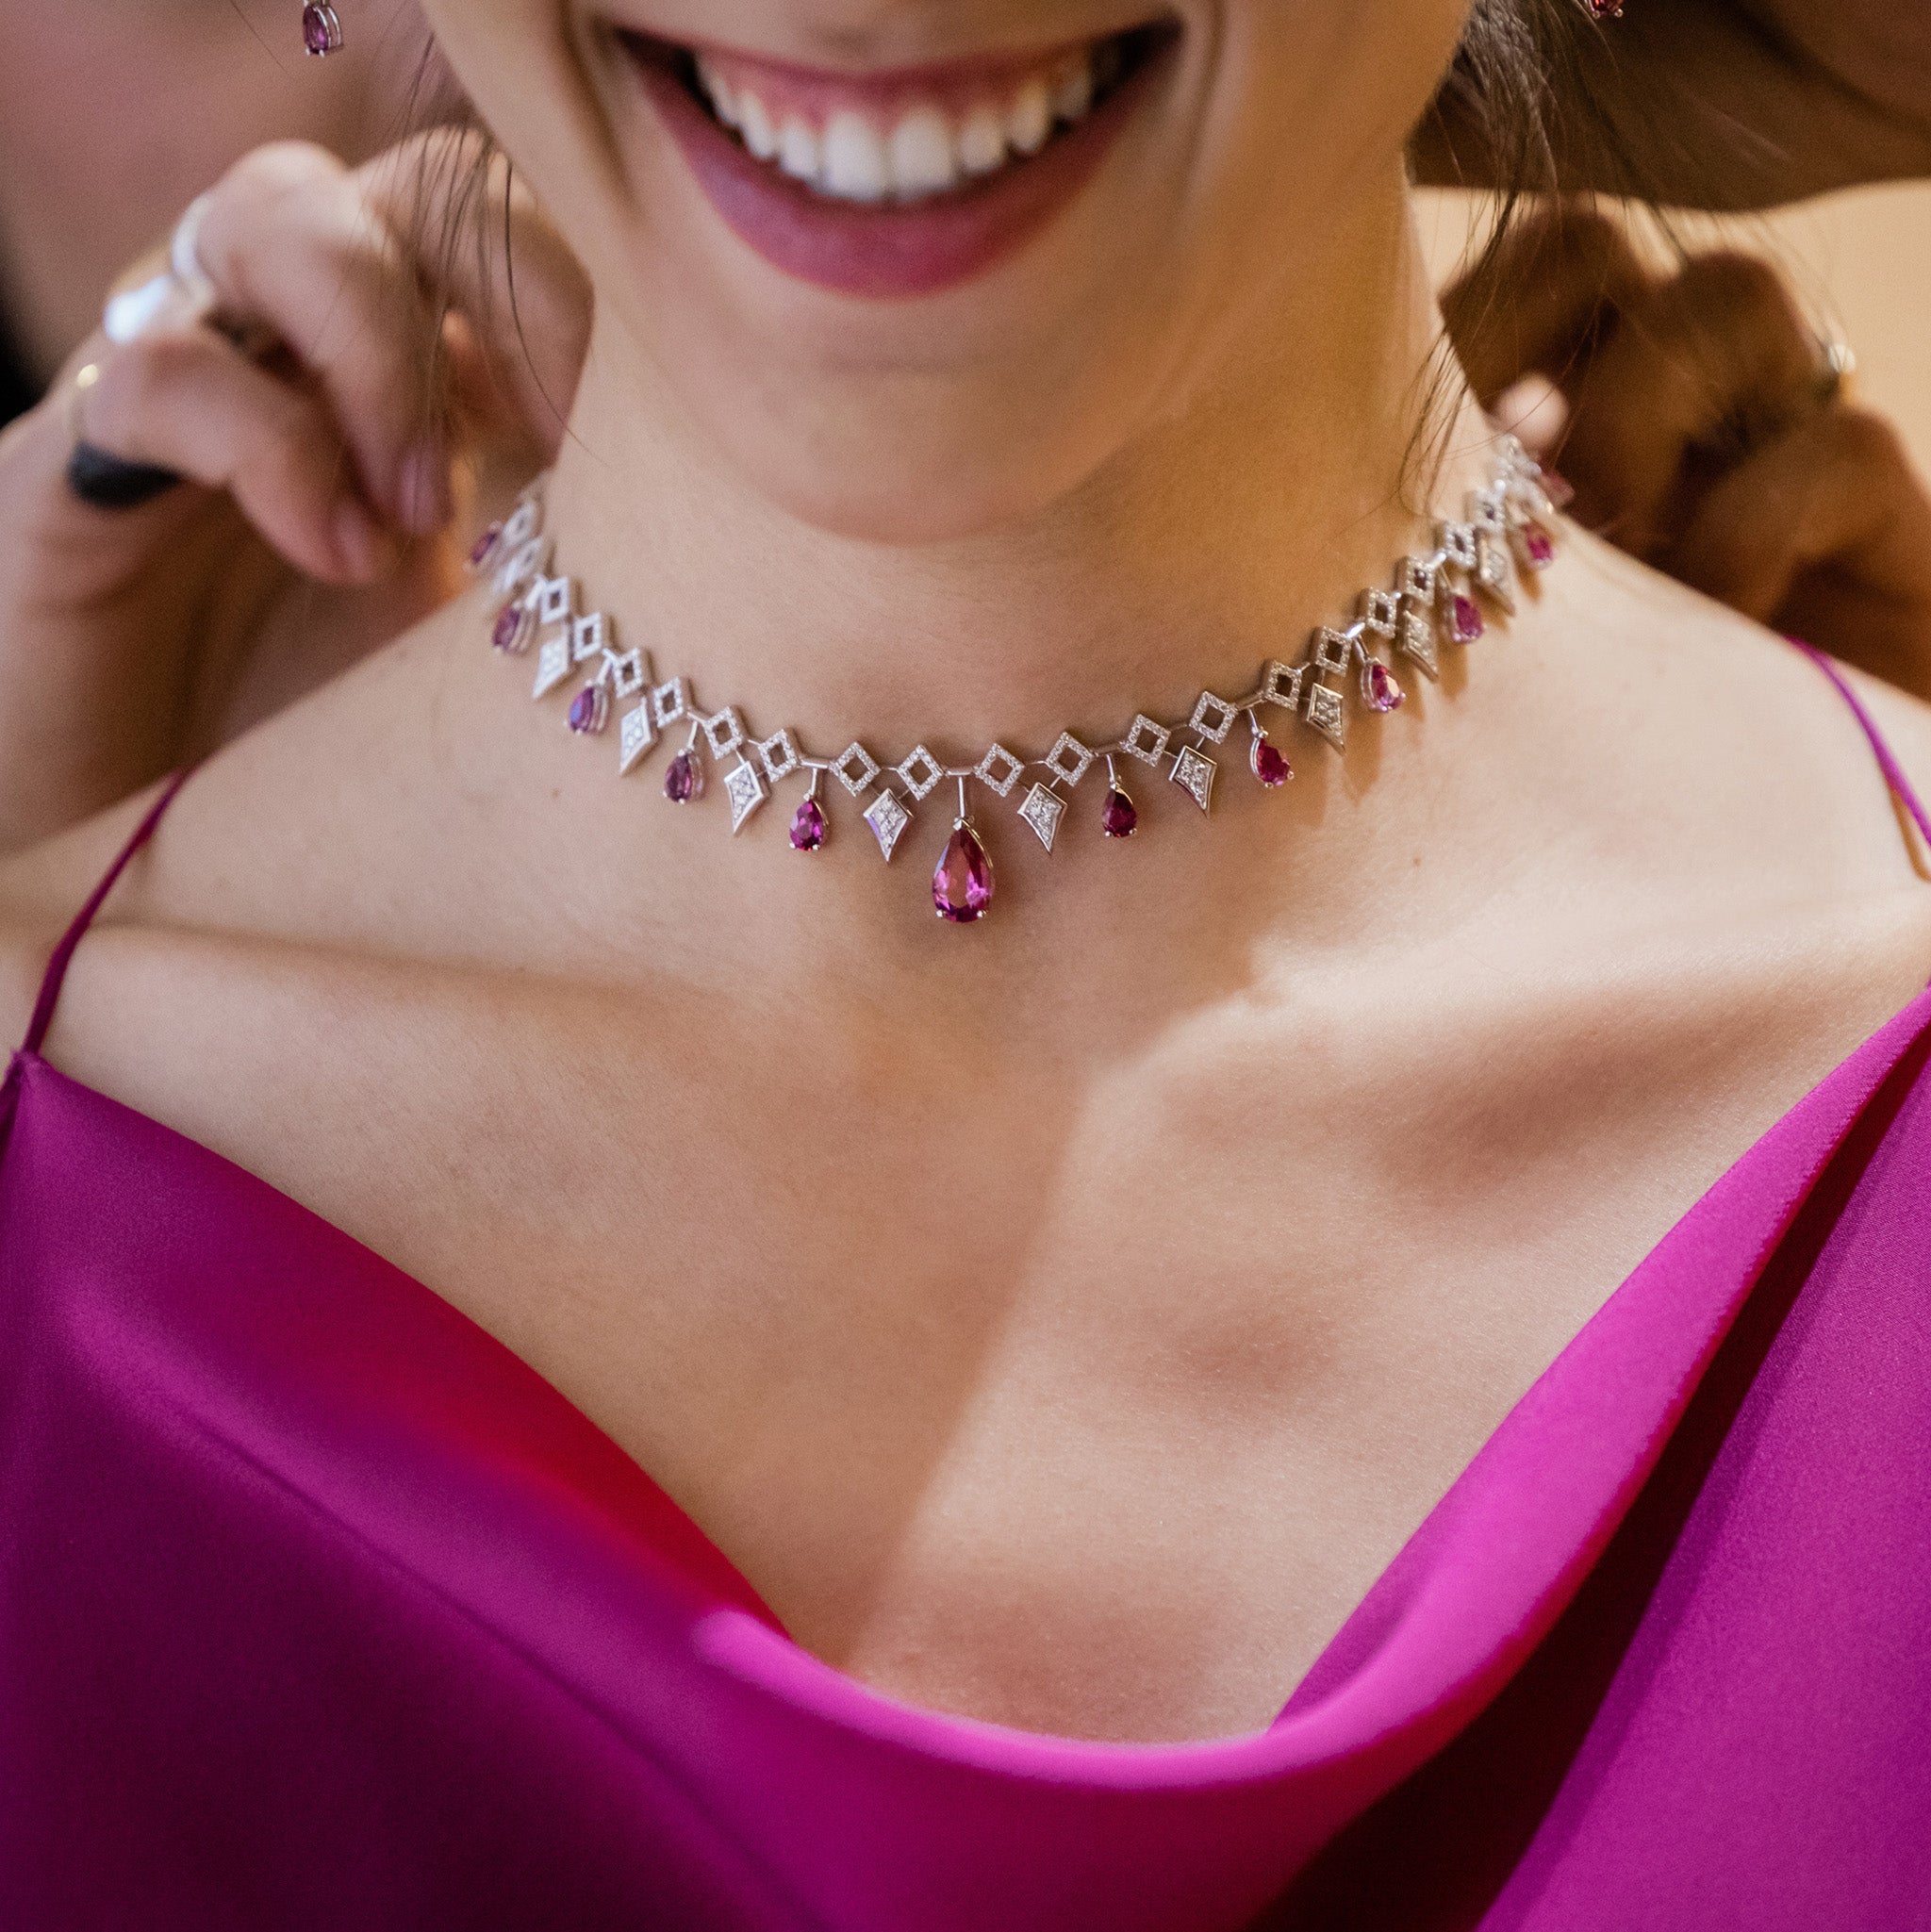 Inferno Choker: A captivating choker adorned with rubellite gemstones and diamonds set in white gold, presented on model. 